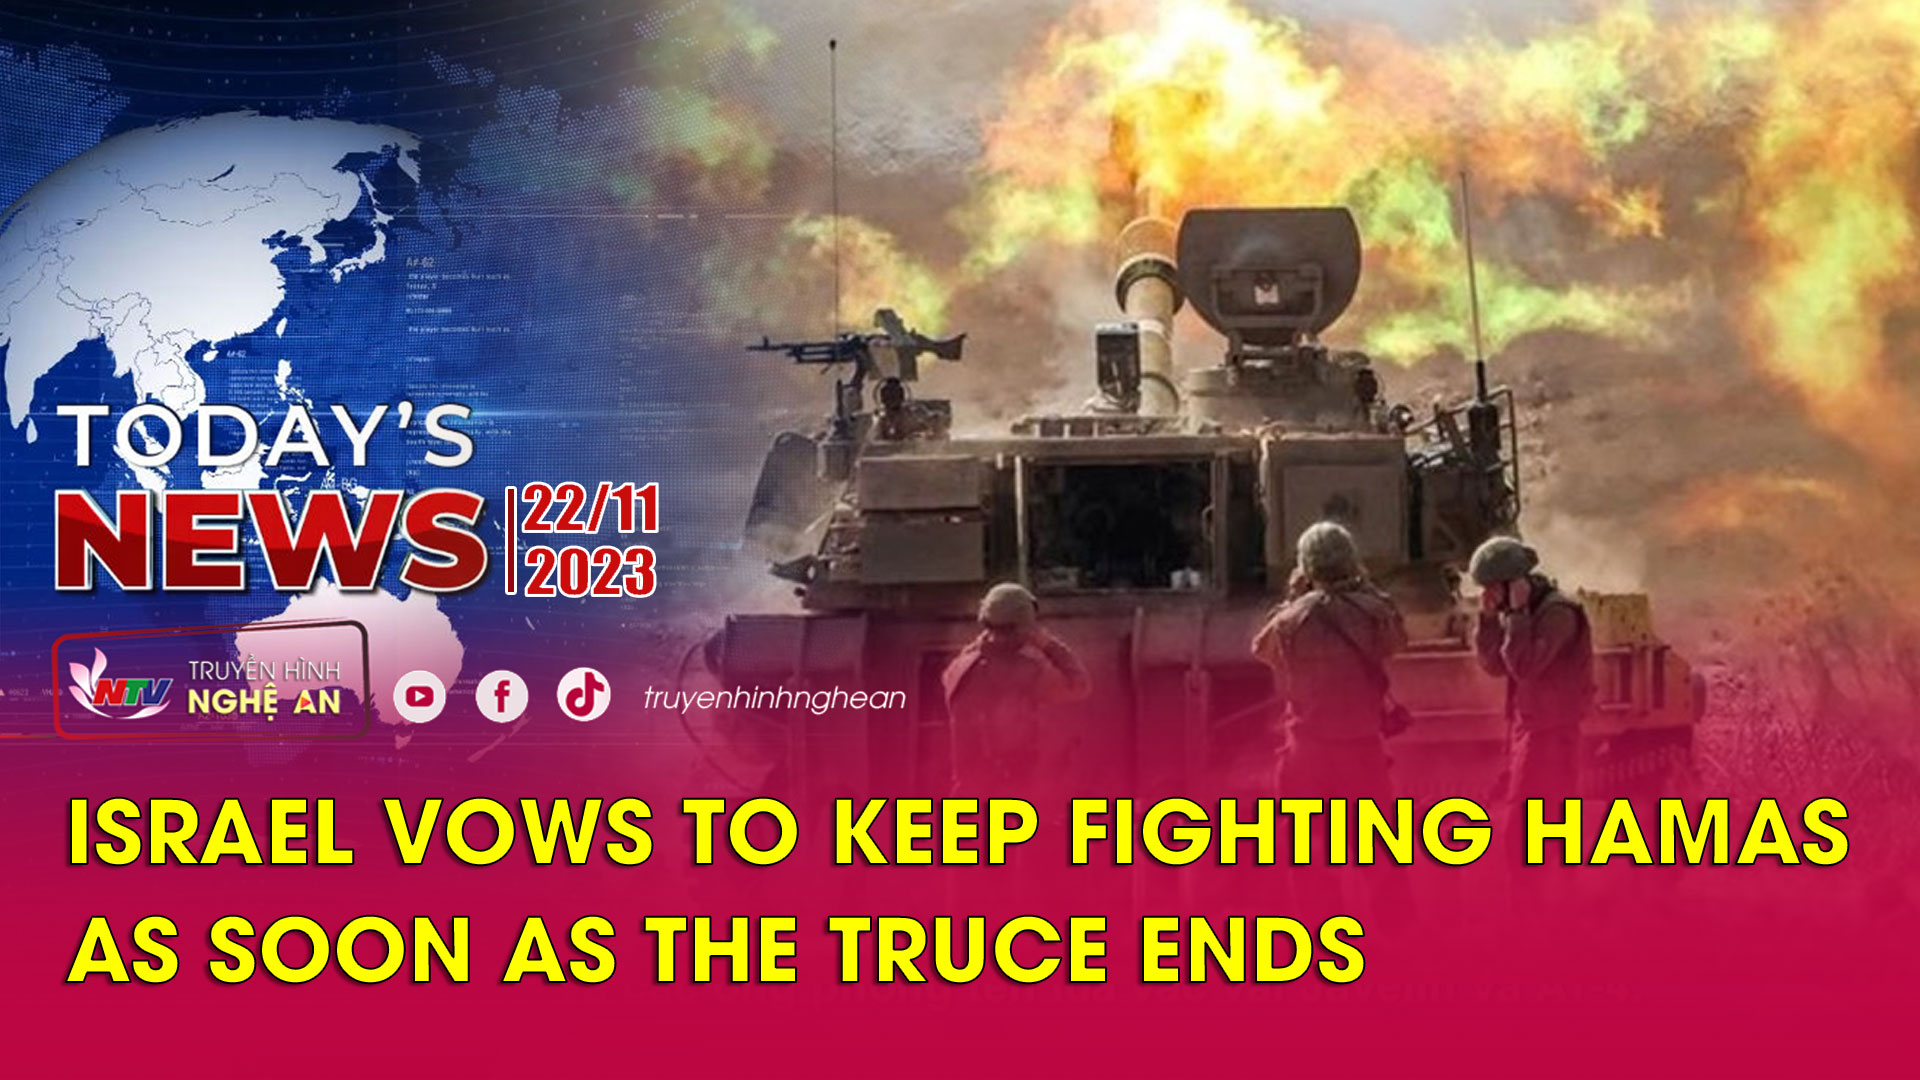 Today's News - 22/11/2023: Israel vows to keep fighting Hamas as soon as the truce ends